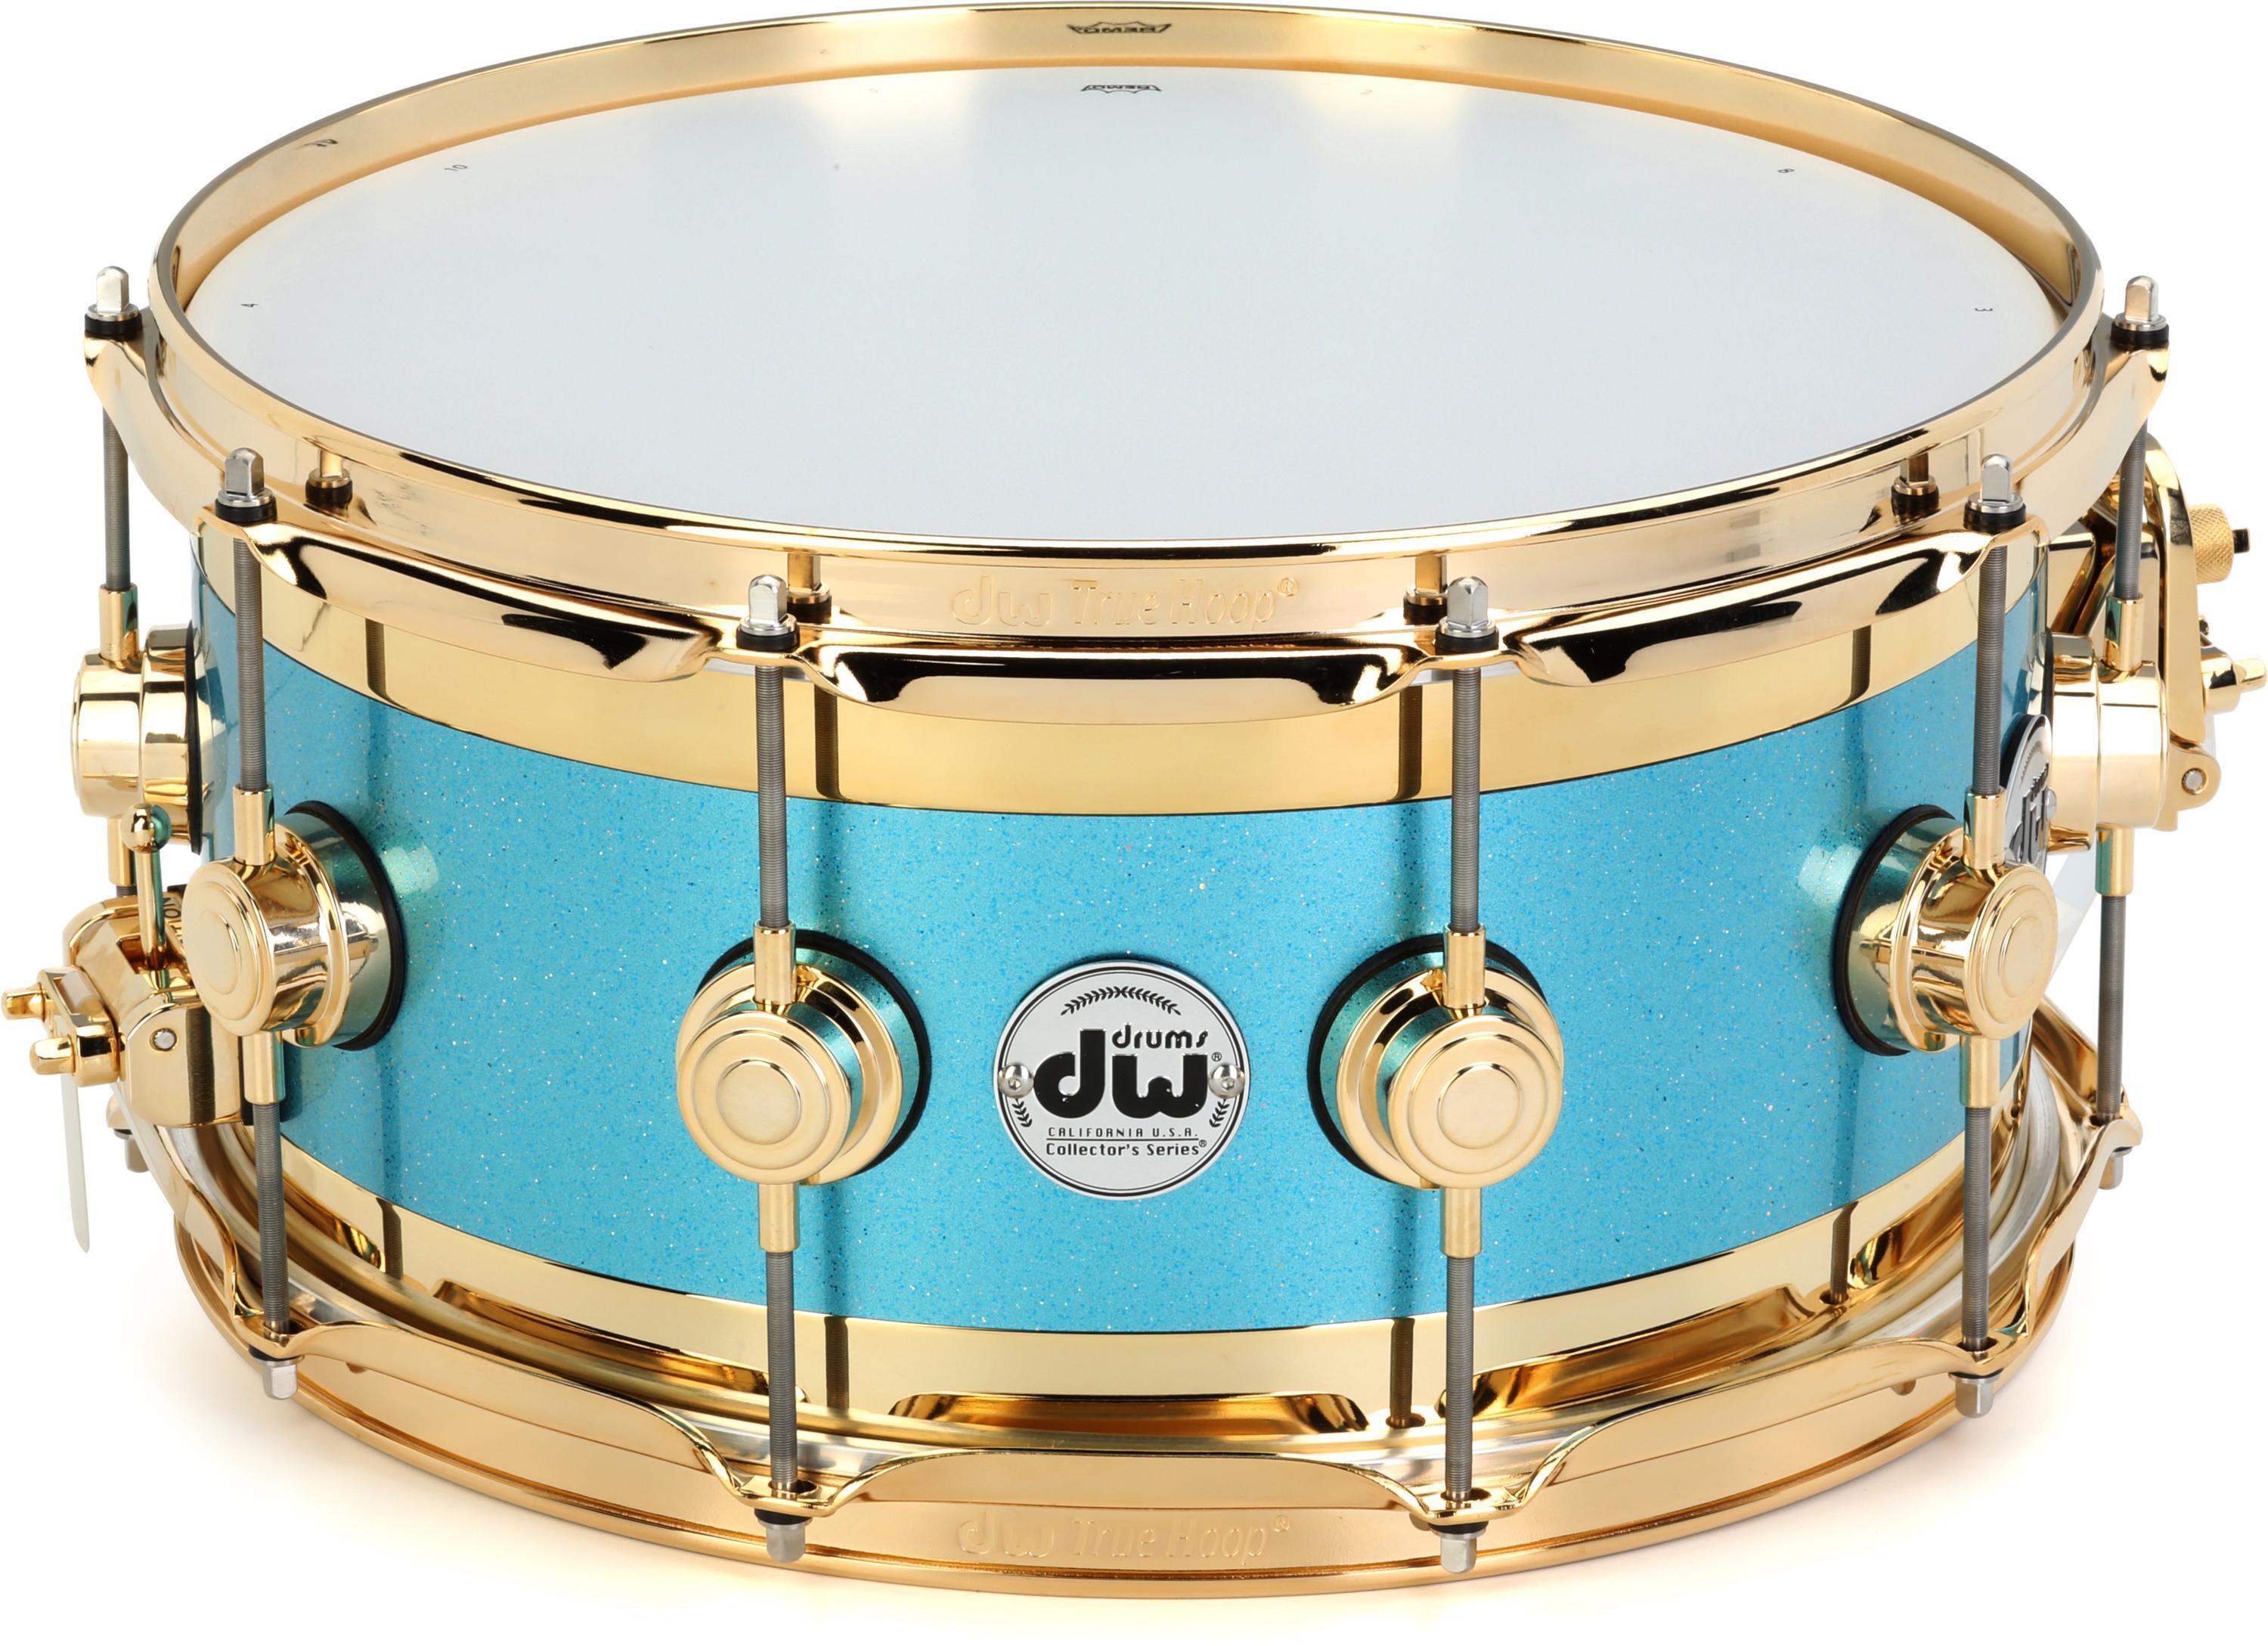 DW Collector's Series Edge Snare Drum - 7 x 14-inch - Silver Blue Sparkle  Lacquer